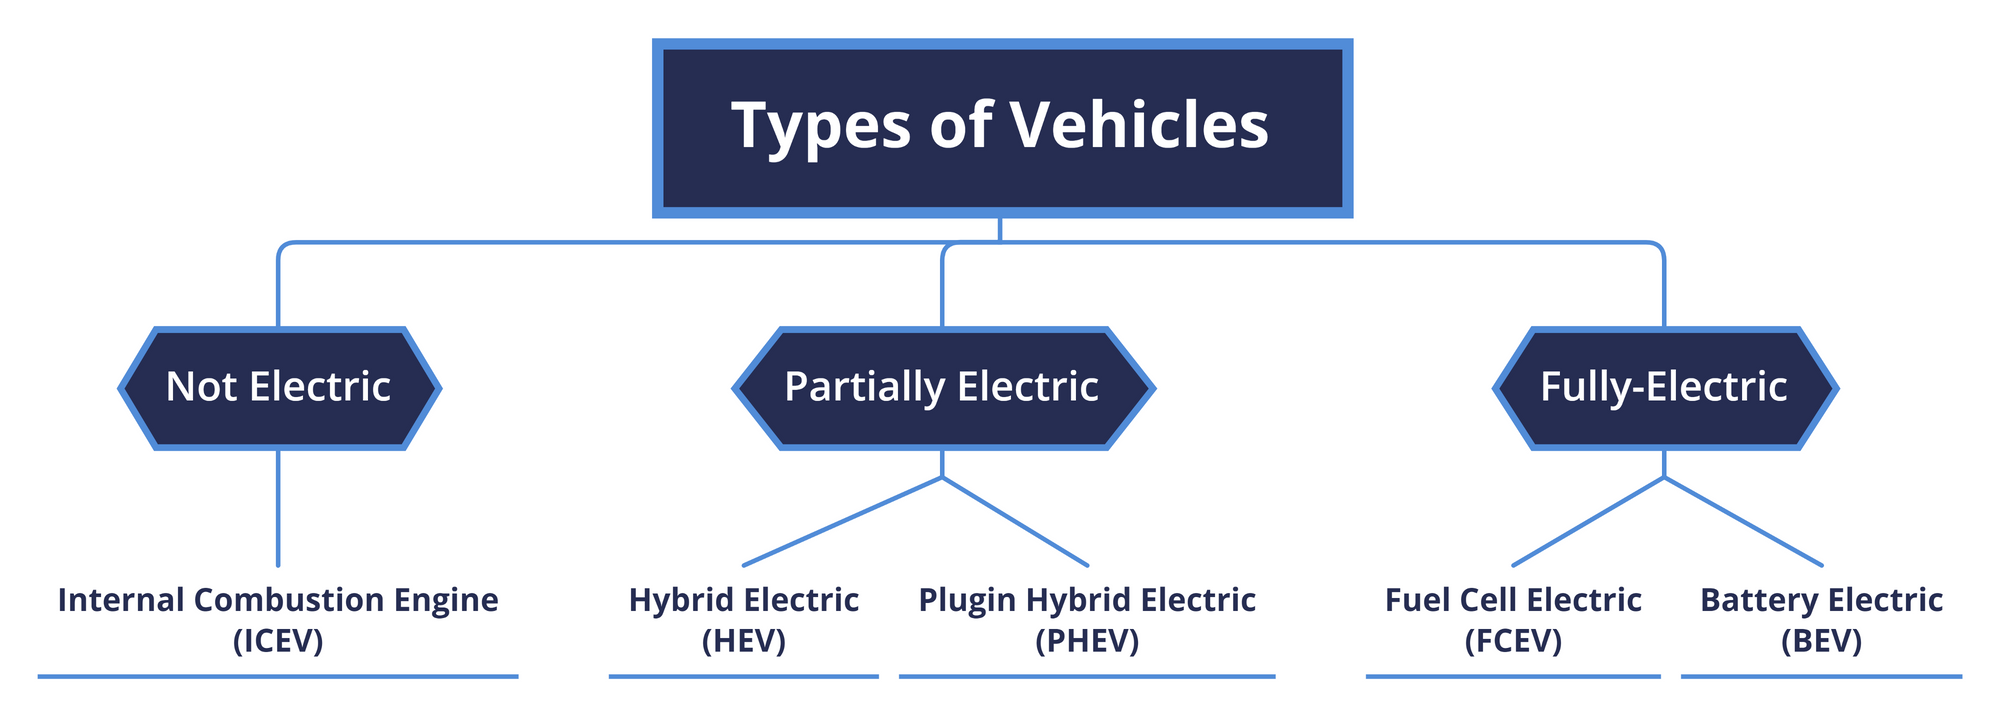 What are EVs?